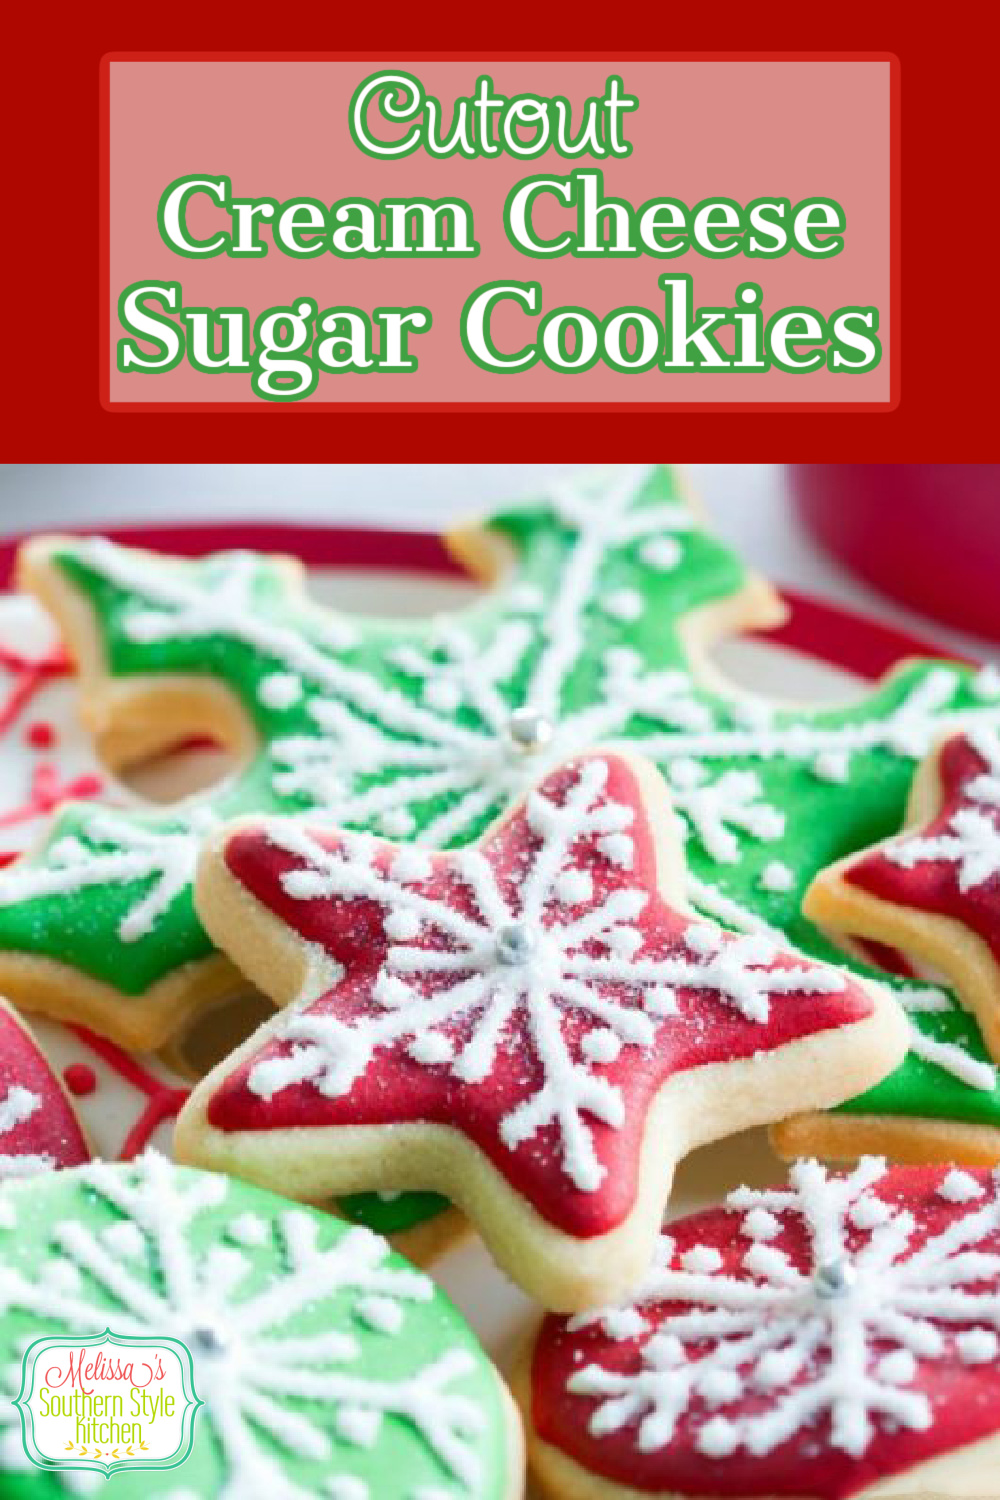 Add these Cutout Cream Cheese Sugar Cookies to your holiday baking plans #christmascookies #sugarcookies #bestsugarcookies #creamcheesecookies #cookierecipes #holidayrecipes #holidaybaking #creamcheesecookies #holidays #cookieswap #desserts #dessertfoodrecipes #southernrecipes #southernfood #melissassouthernstylekitchen via @melissasssk